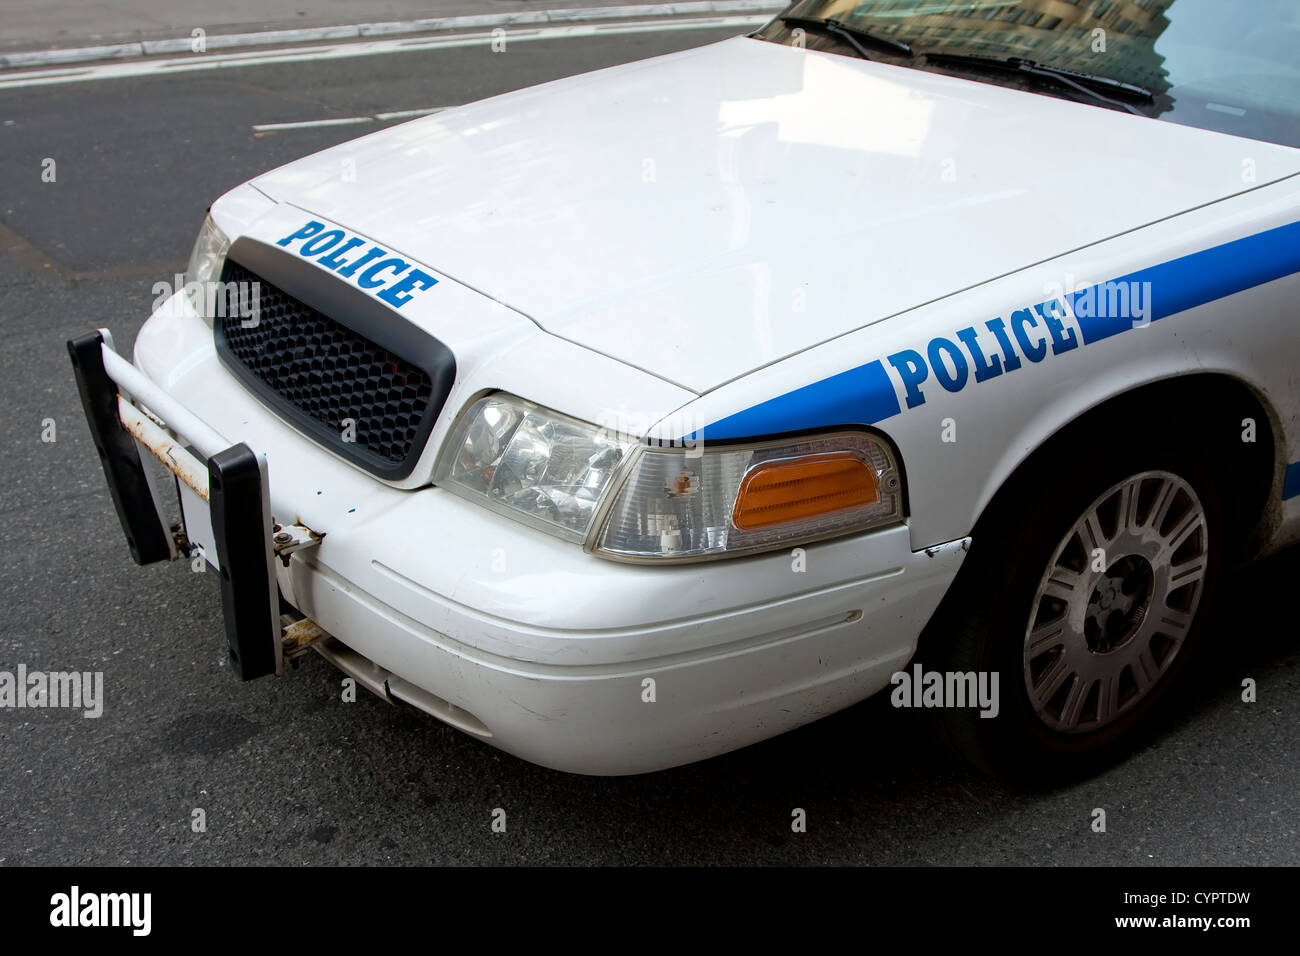 Front And Side View Of A White Police Car With Blue Letters Saying